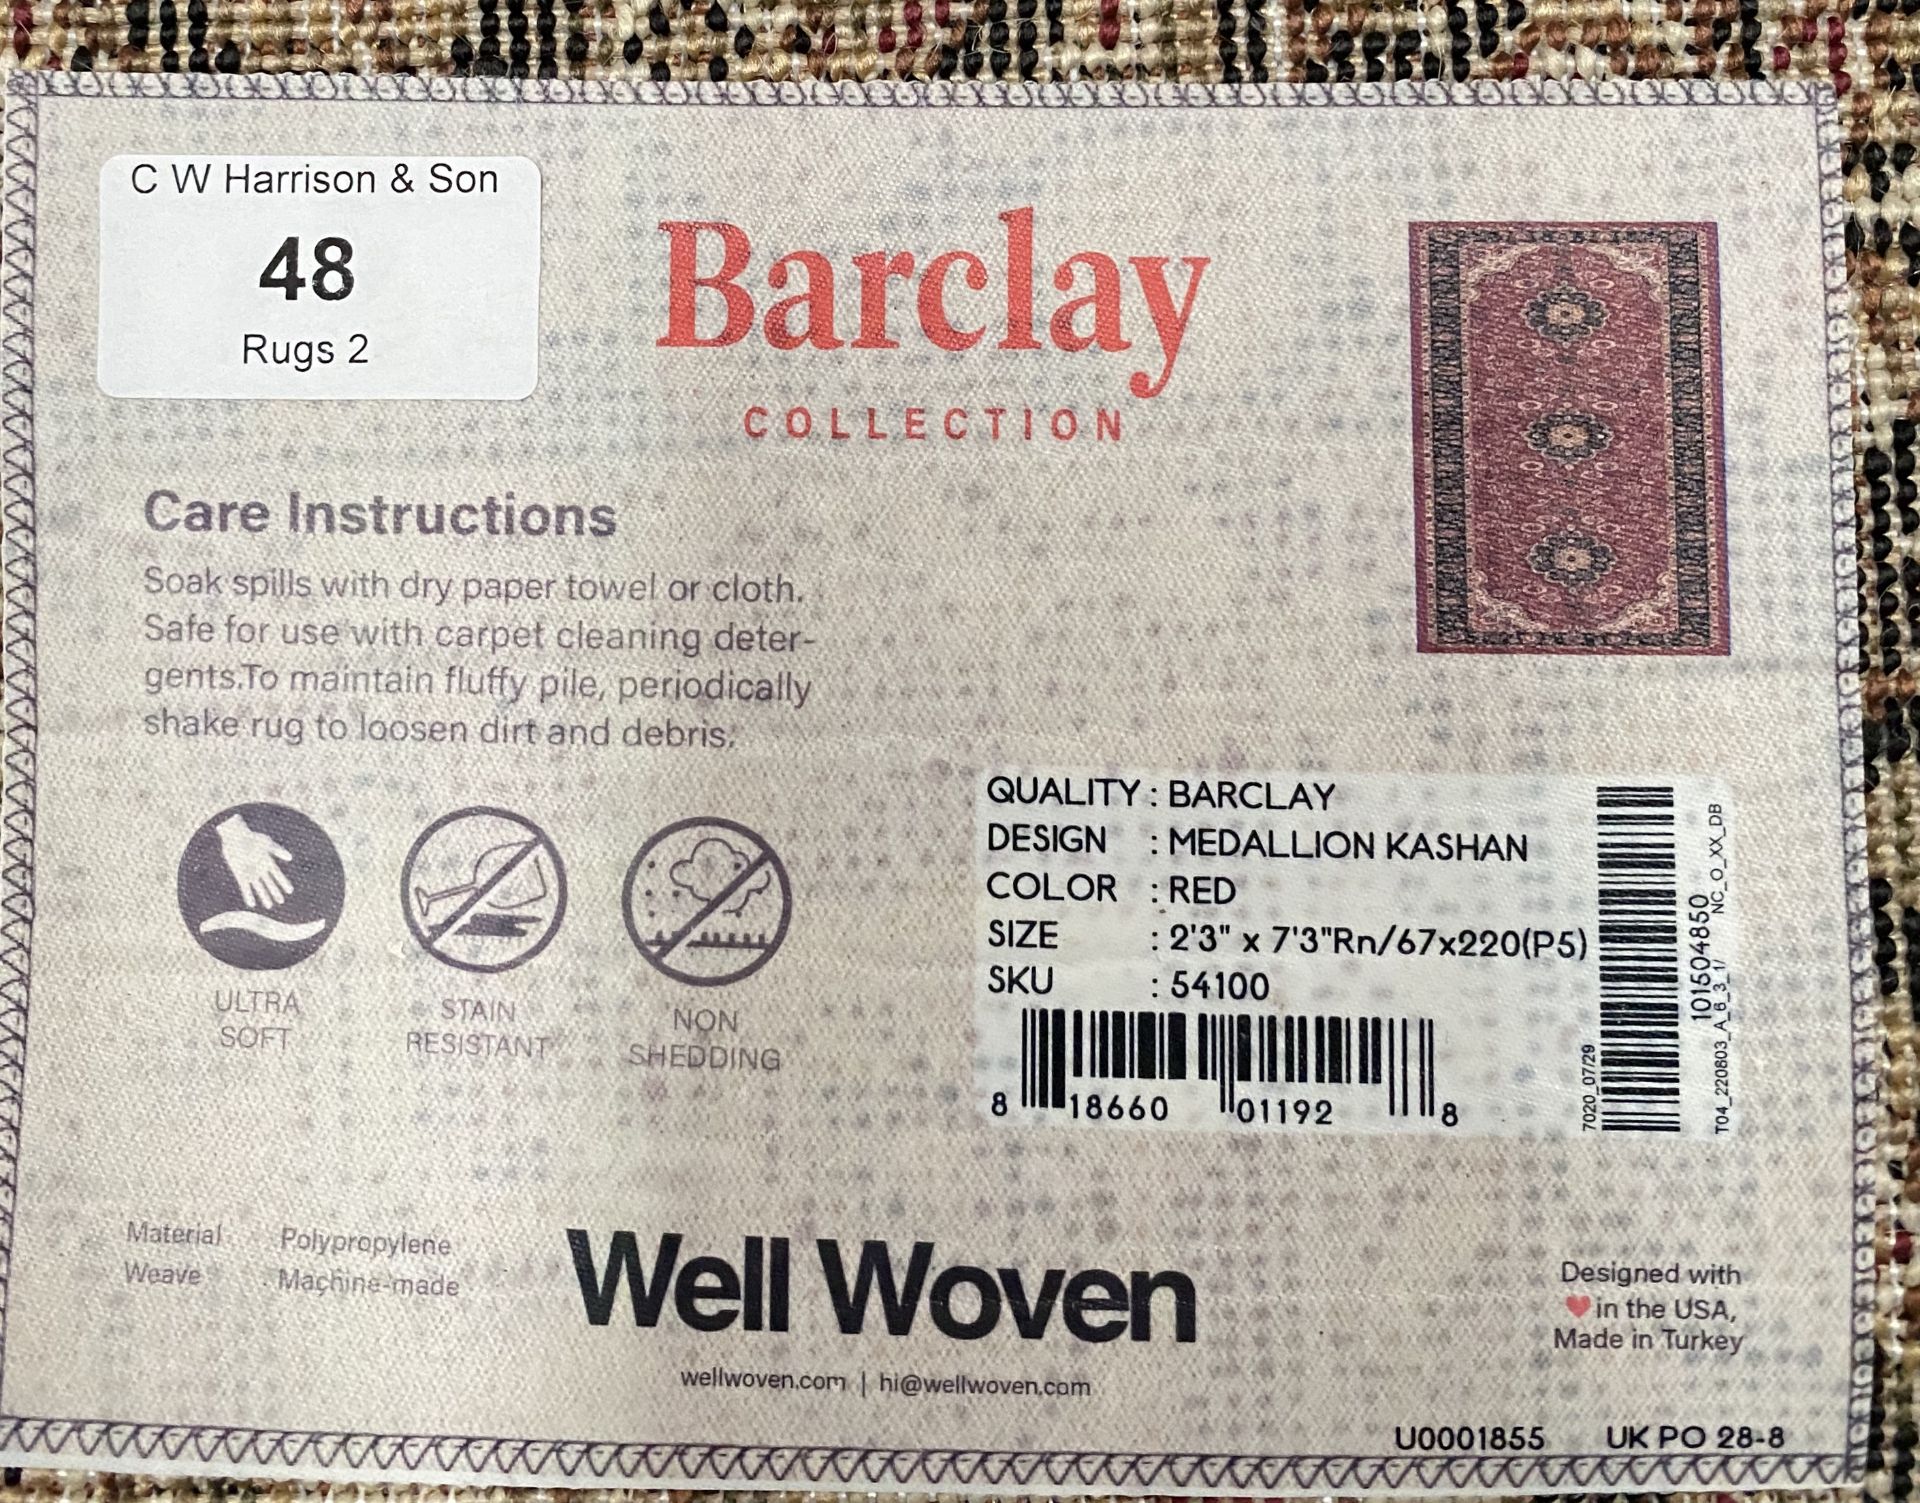 A Barclay Collection Medallion Kashan red rug - 67cm x 220cm - Image 2 of 2